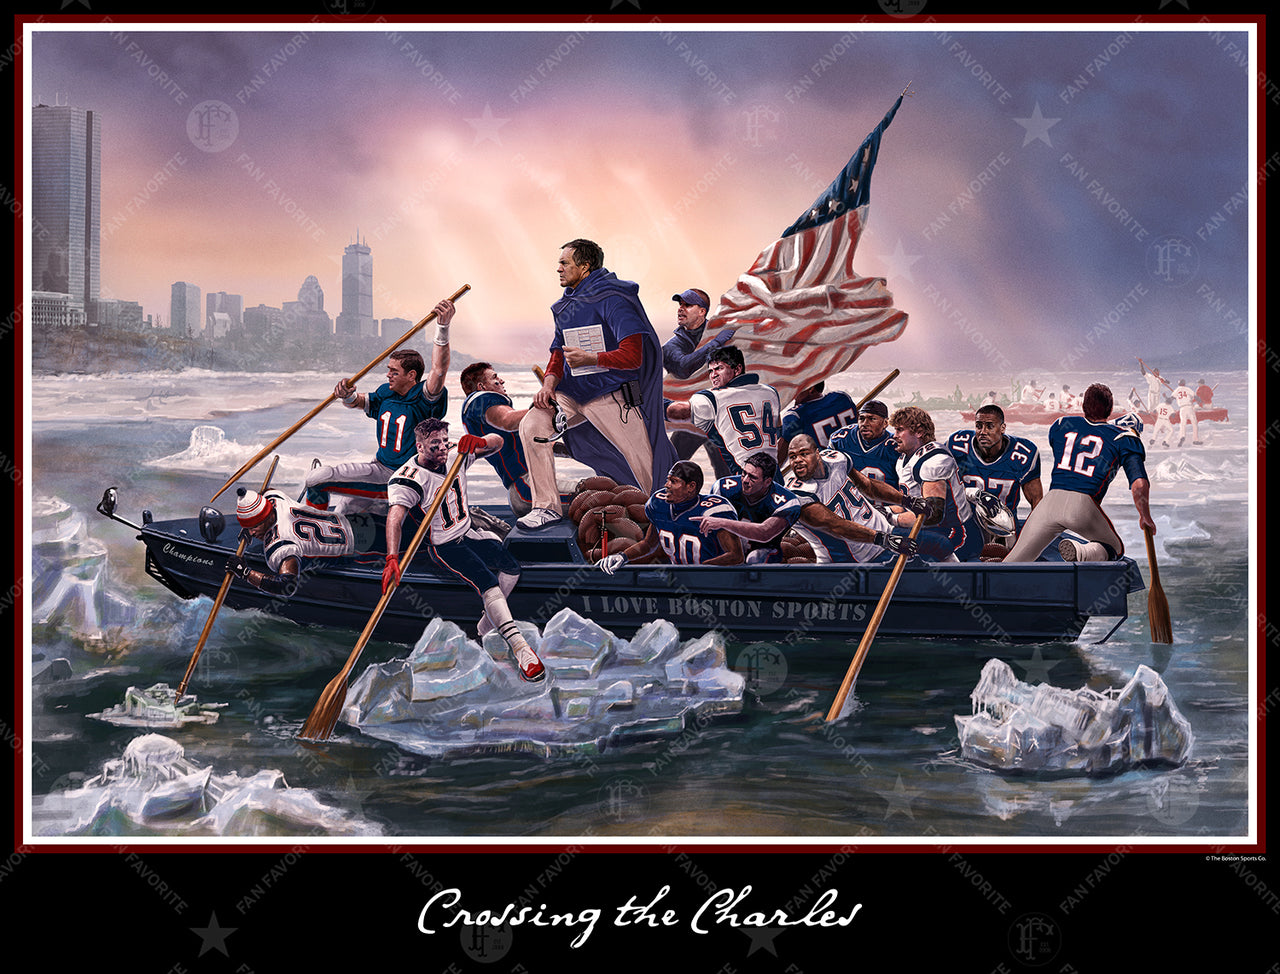 Crossing The Charles Wall Print